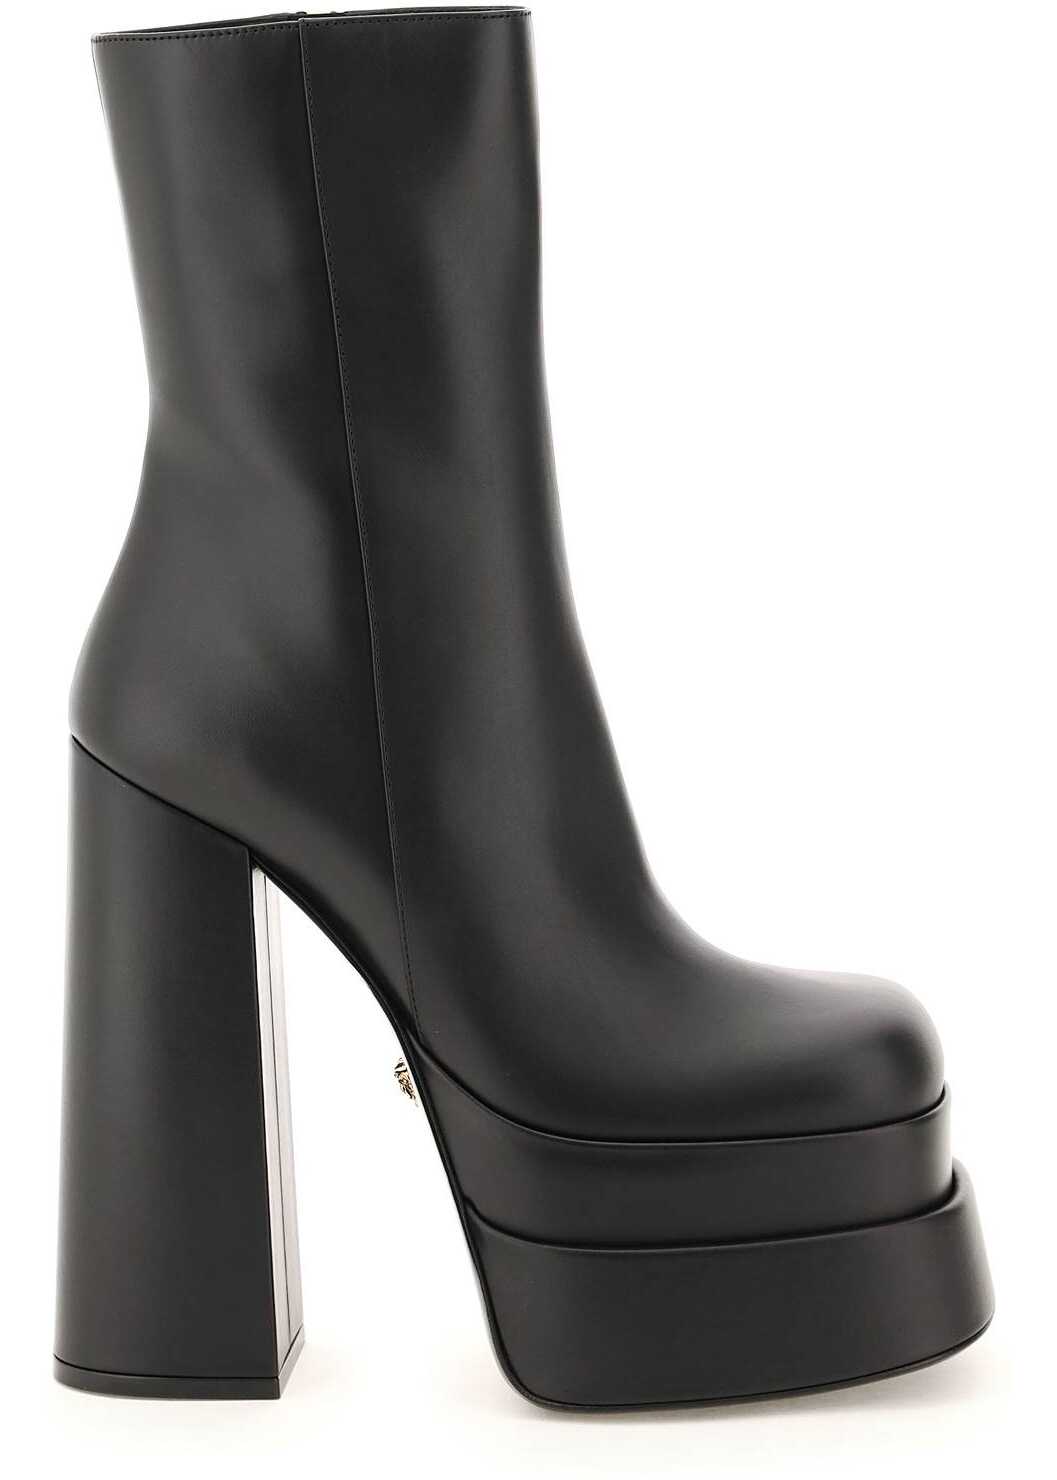 Versace Intrico Double Platform Ankle Boots NERO ORO VERSACE